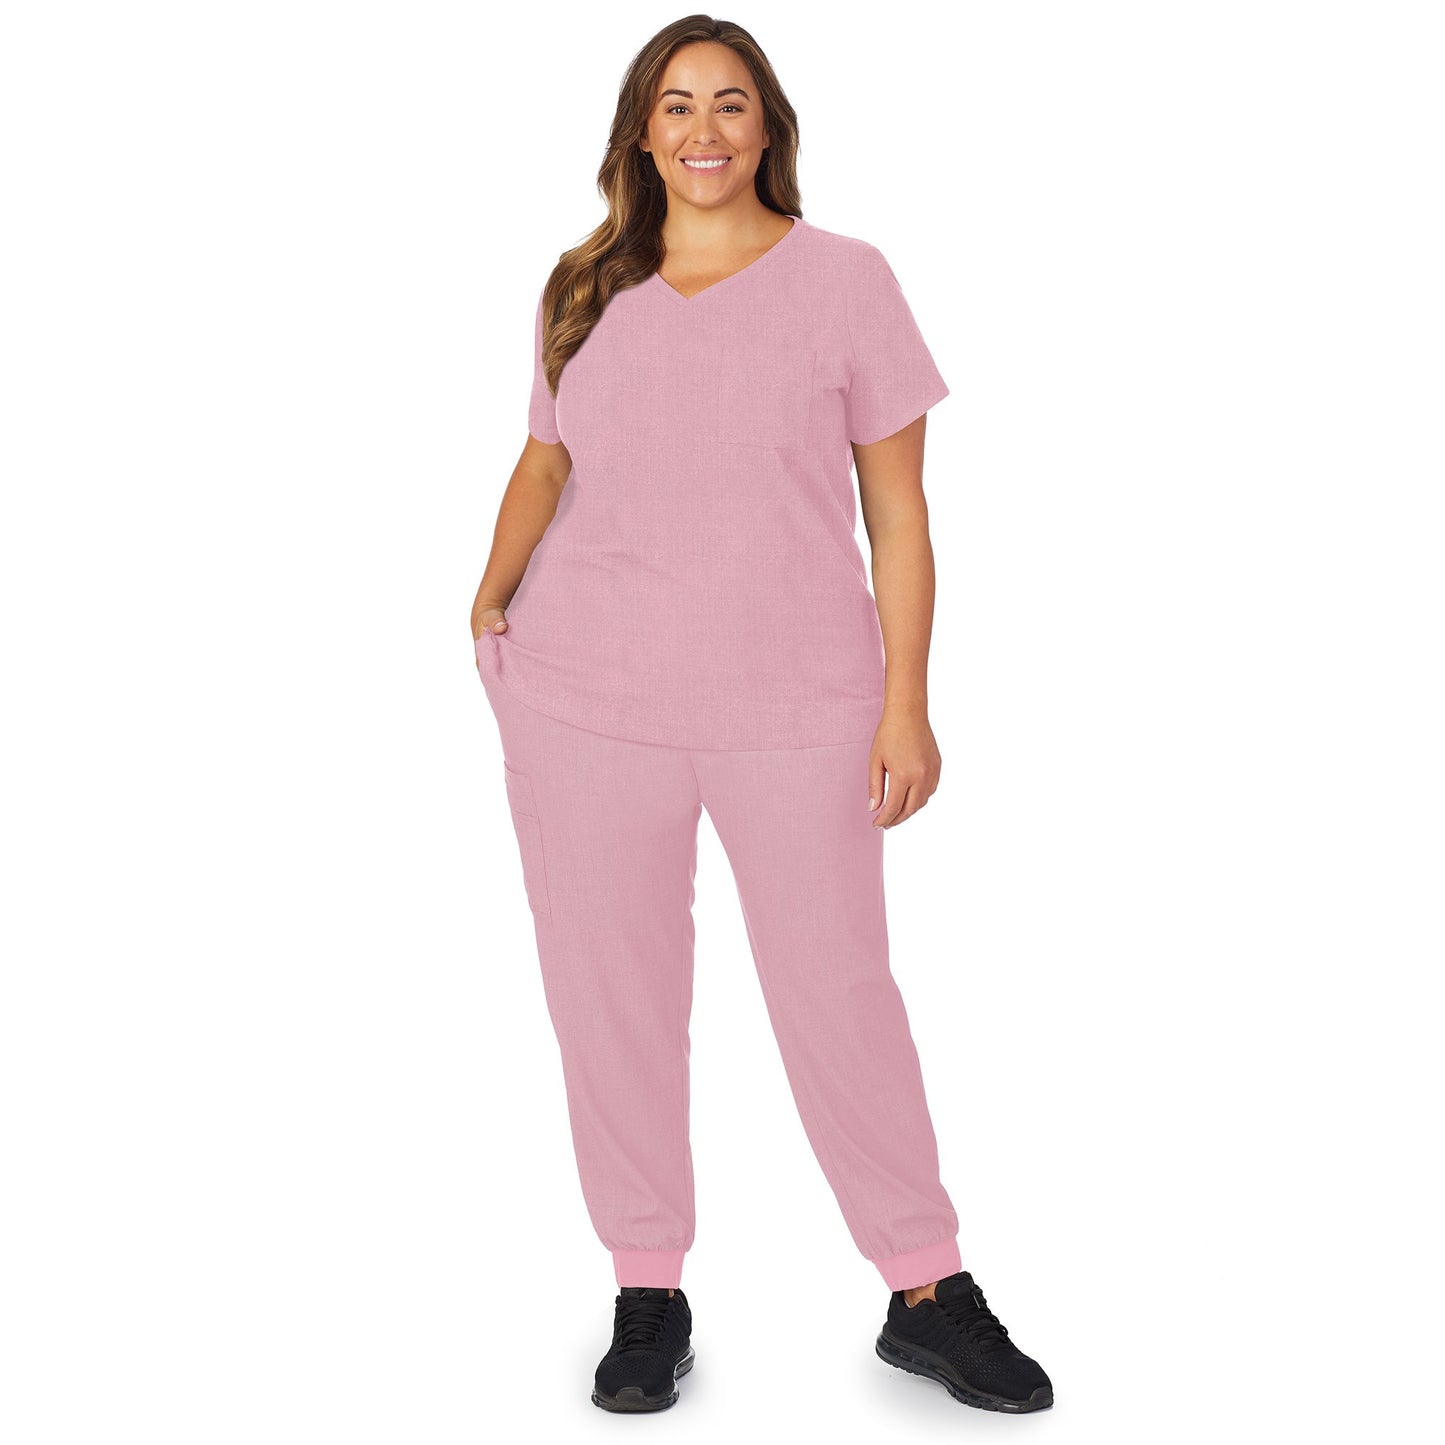 Cameo Pink Heather;Model is wearing size 1X. She is 5’9.5”, Bust 43”, Waist 37”, Hips 49.5”.@A lady wearing pink cameo heather scrub v-neck top with chest pocket plus.